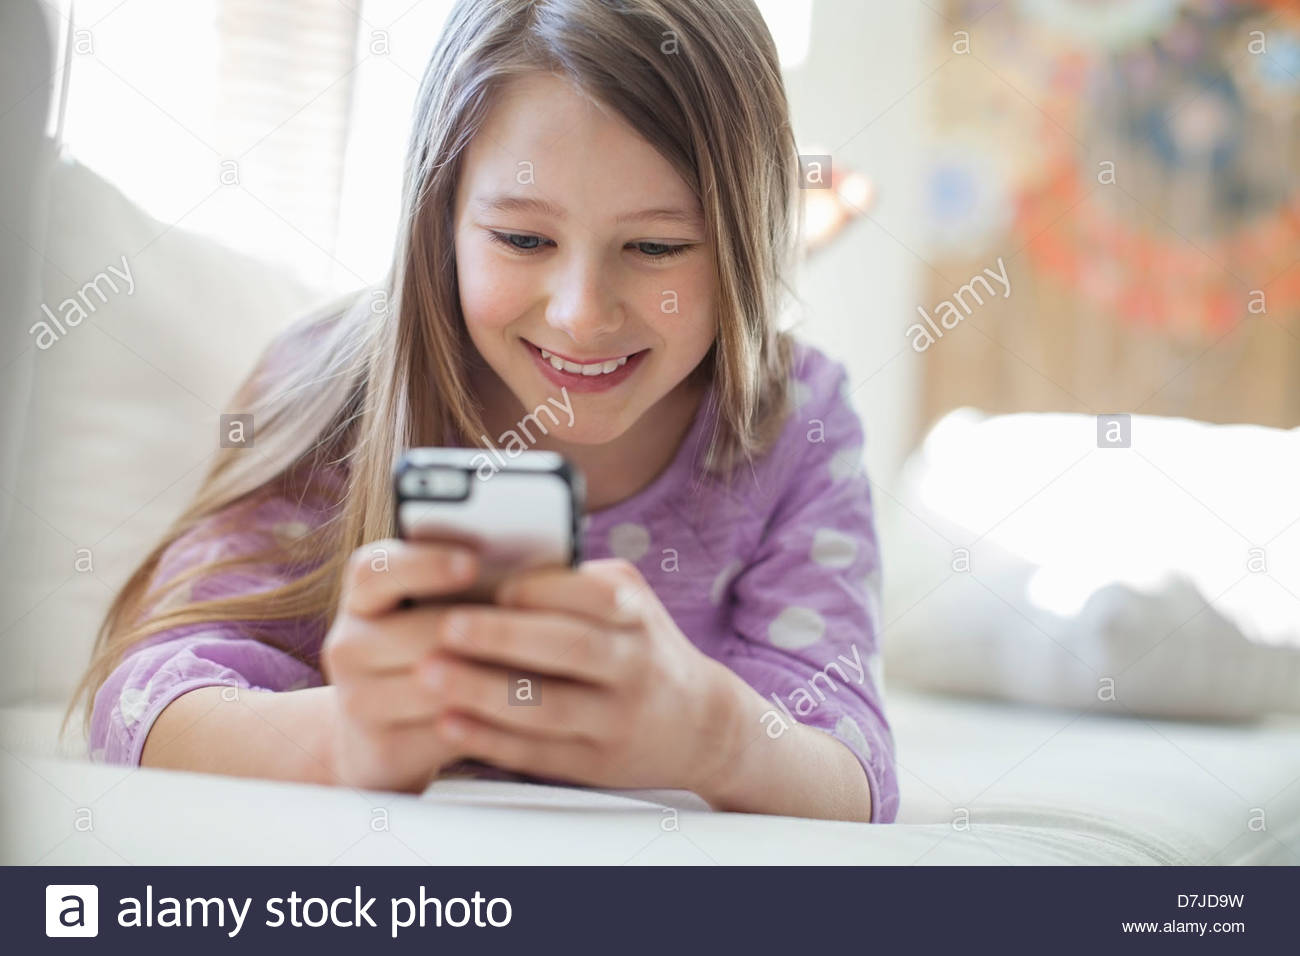 young-girl-text-messaging-with-mobile-ph